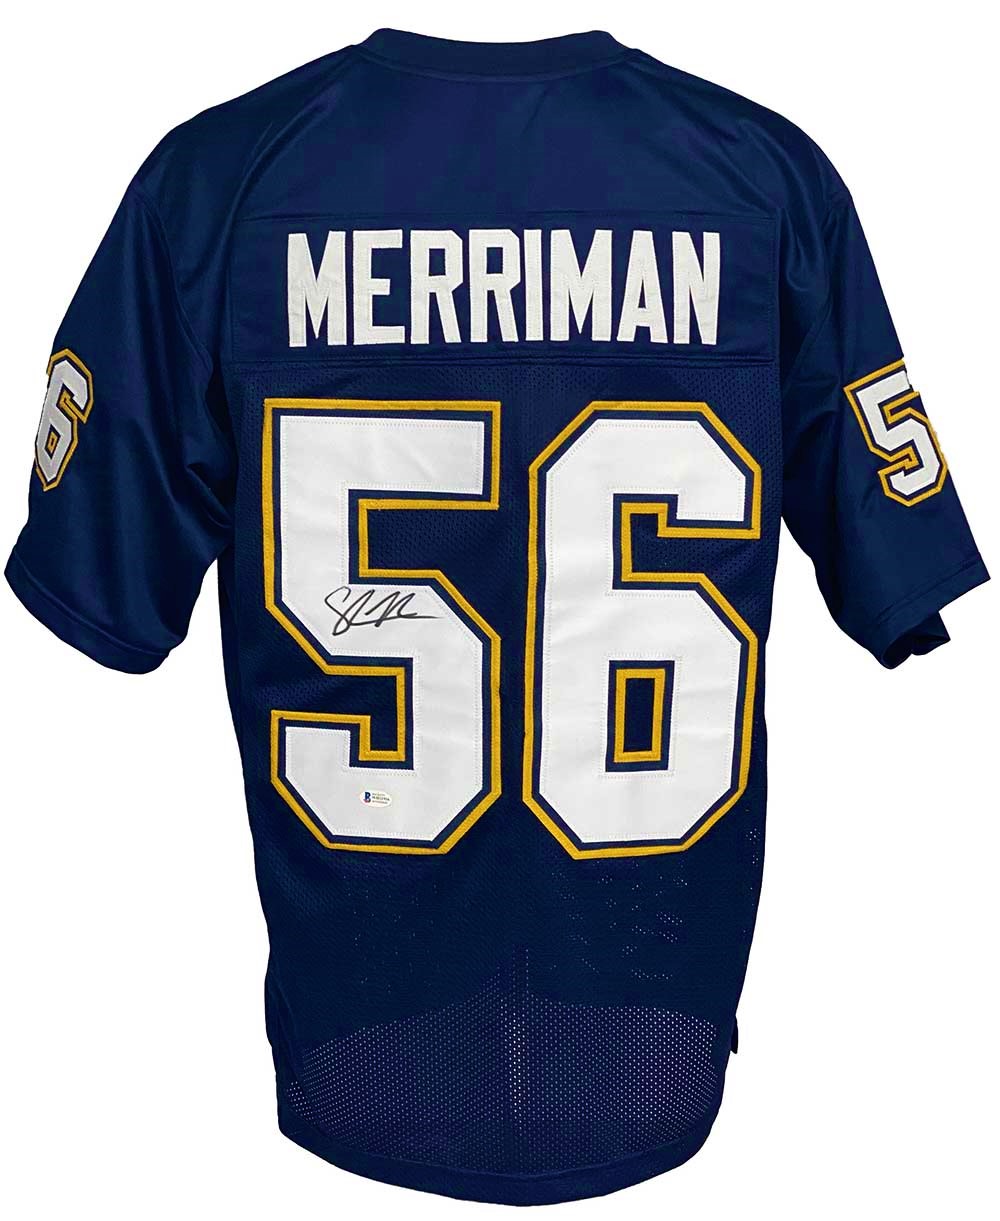 Los Angeles Chargers Shawne Merriman Autographed Pro Style Navy Blue Jersey  BAS Authenticated - Tennzone Sports Memorabilia